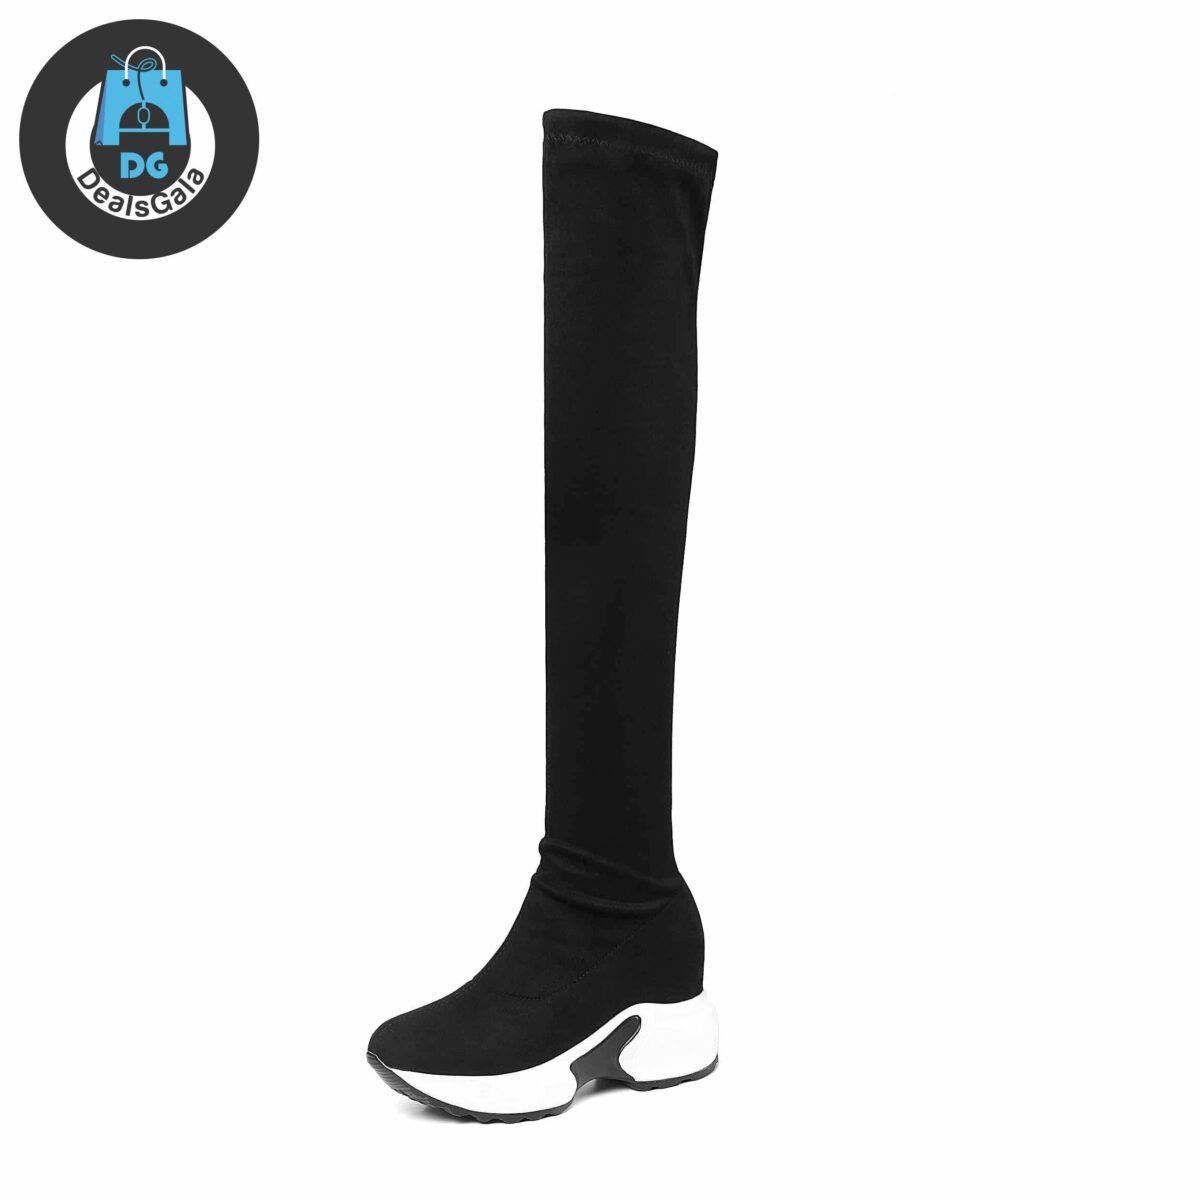 Women’s Sport Chic Style Over the Knee Boots Shoes Women's Shoes Women's Boots cb5feb1b7314637725a2e7: Black|camel|Dark Grey|light gray|wine red